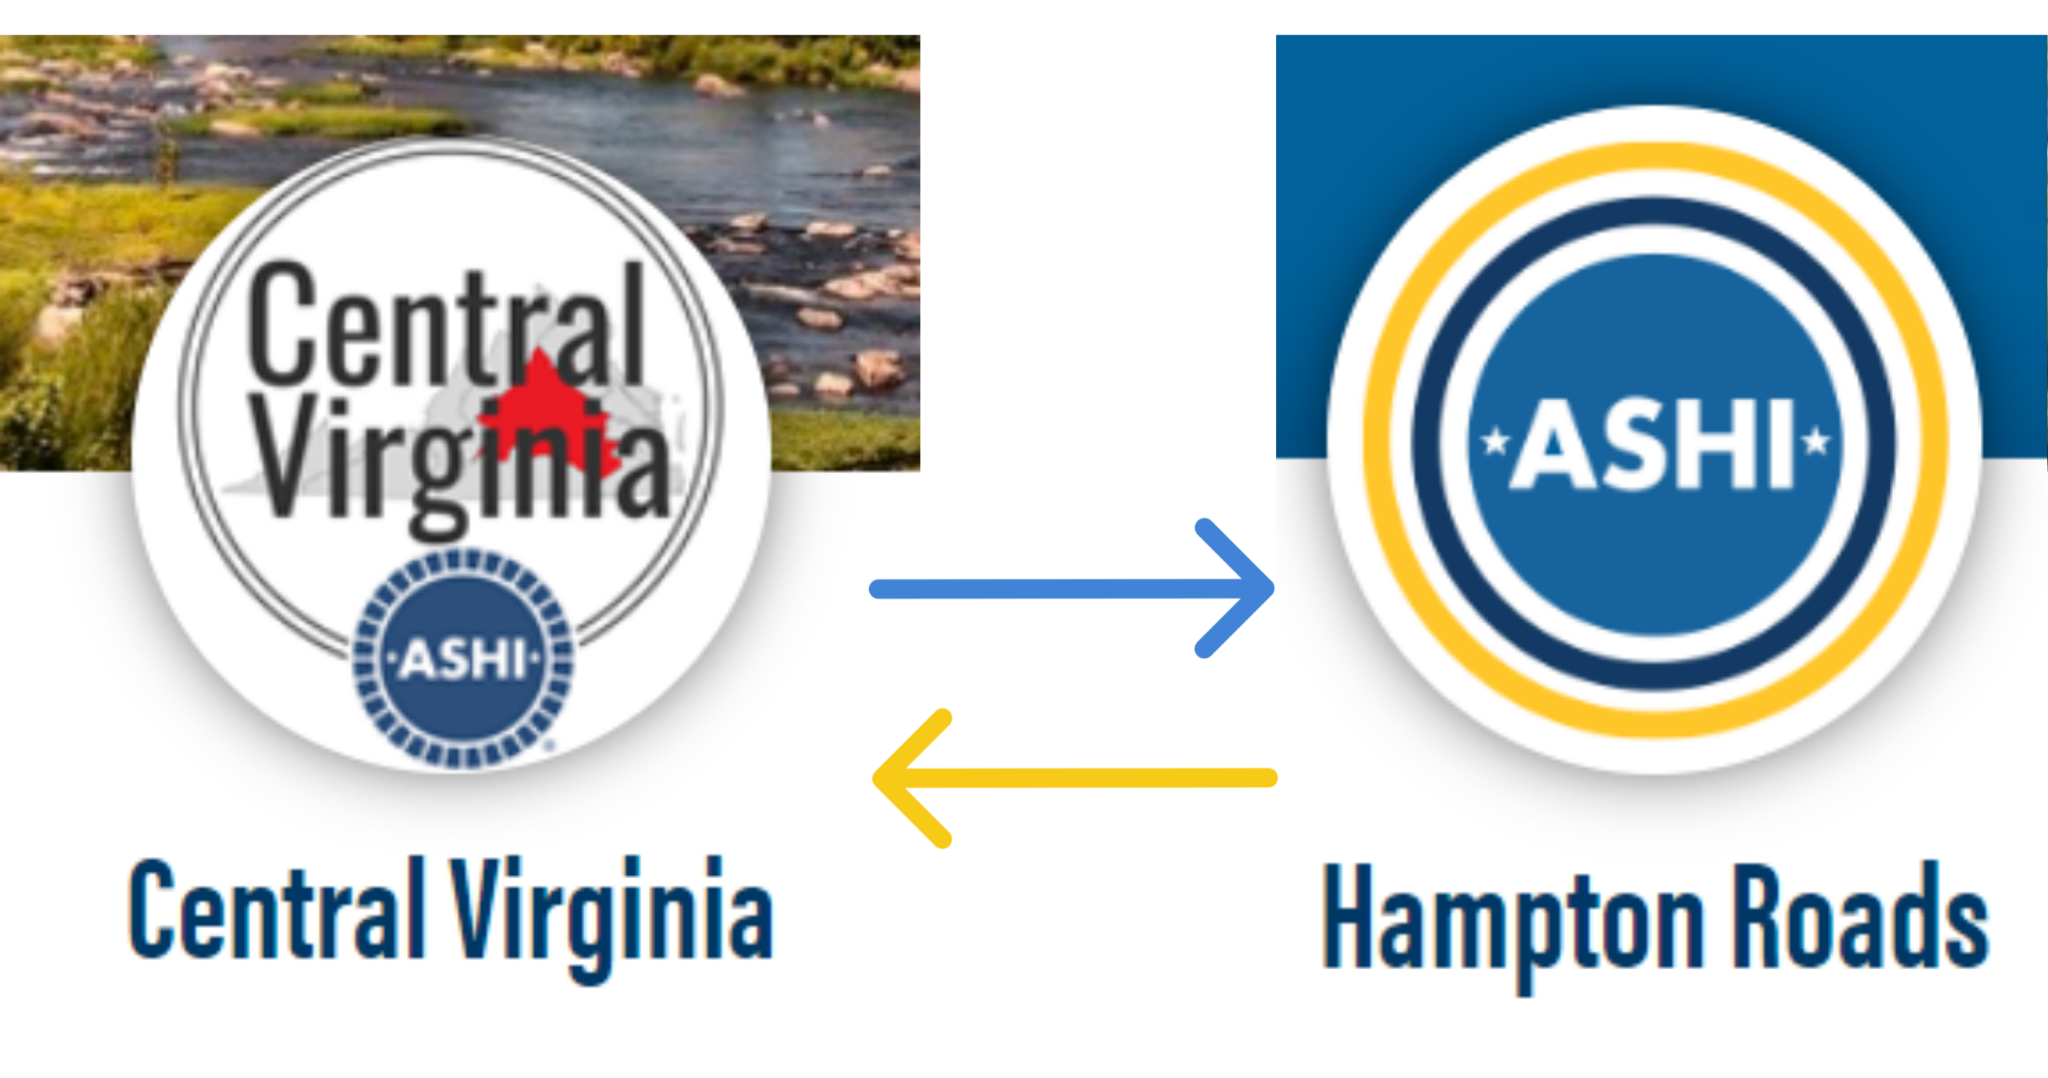 Central Virginia and Hampton Roads ASHI - Logos with blue and yellow arrows pointing between the